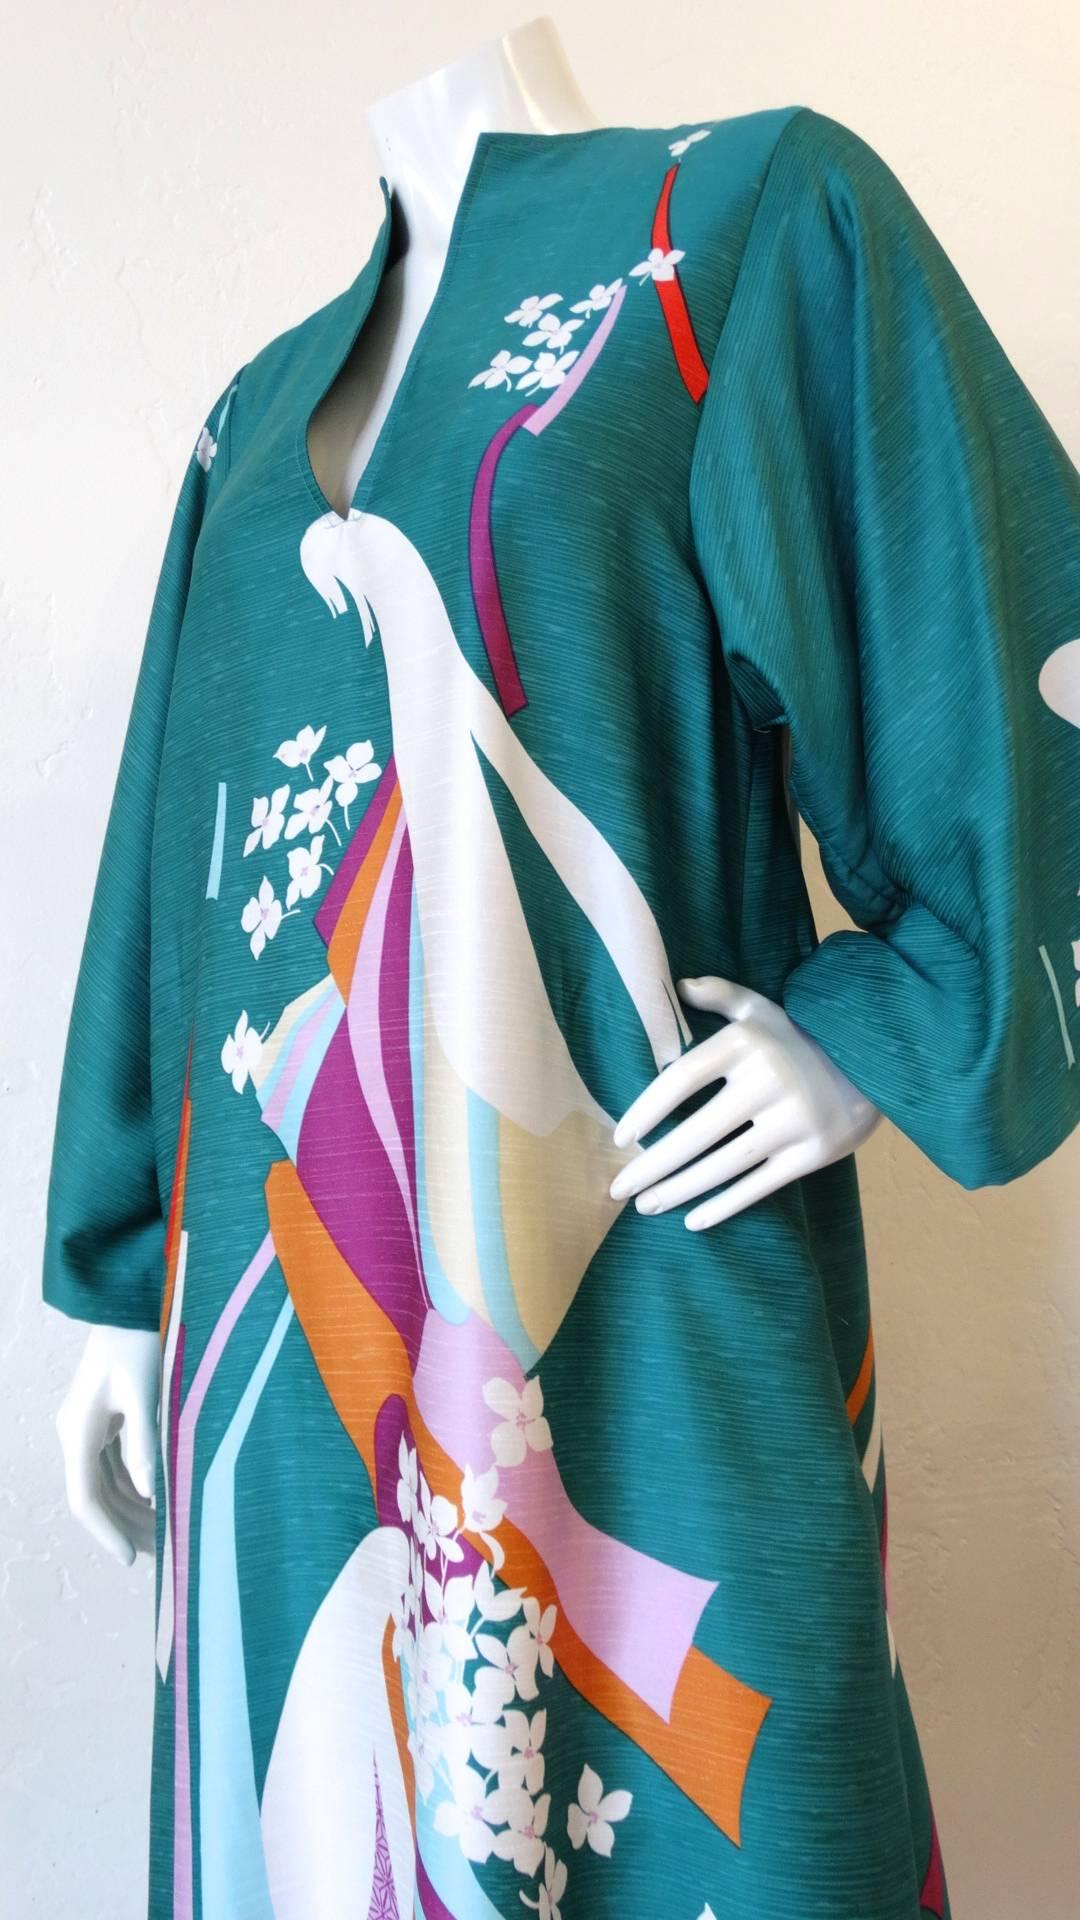 We love a good Kaftan-and you will too with this amazing 1970s Asian motif dress from Neiman Marcus! Breezy, oversized fit- printed with the dreamiest asian inspired swirls and flowers. Long, kimono-like sleeves with a slit neckline. Pair with your